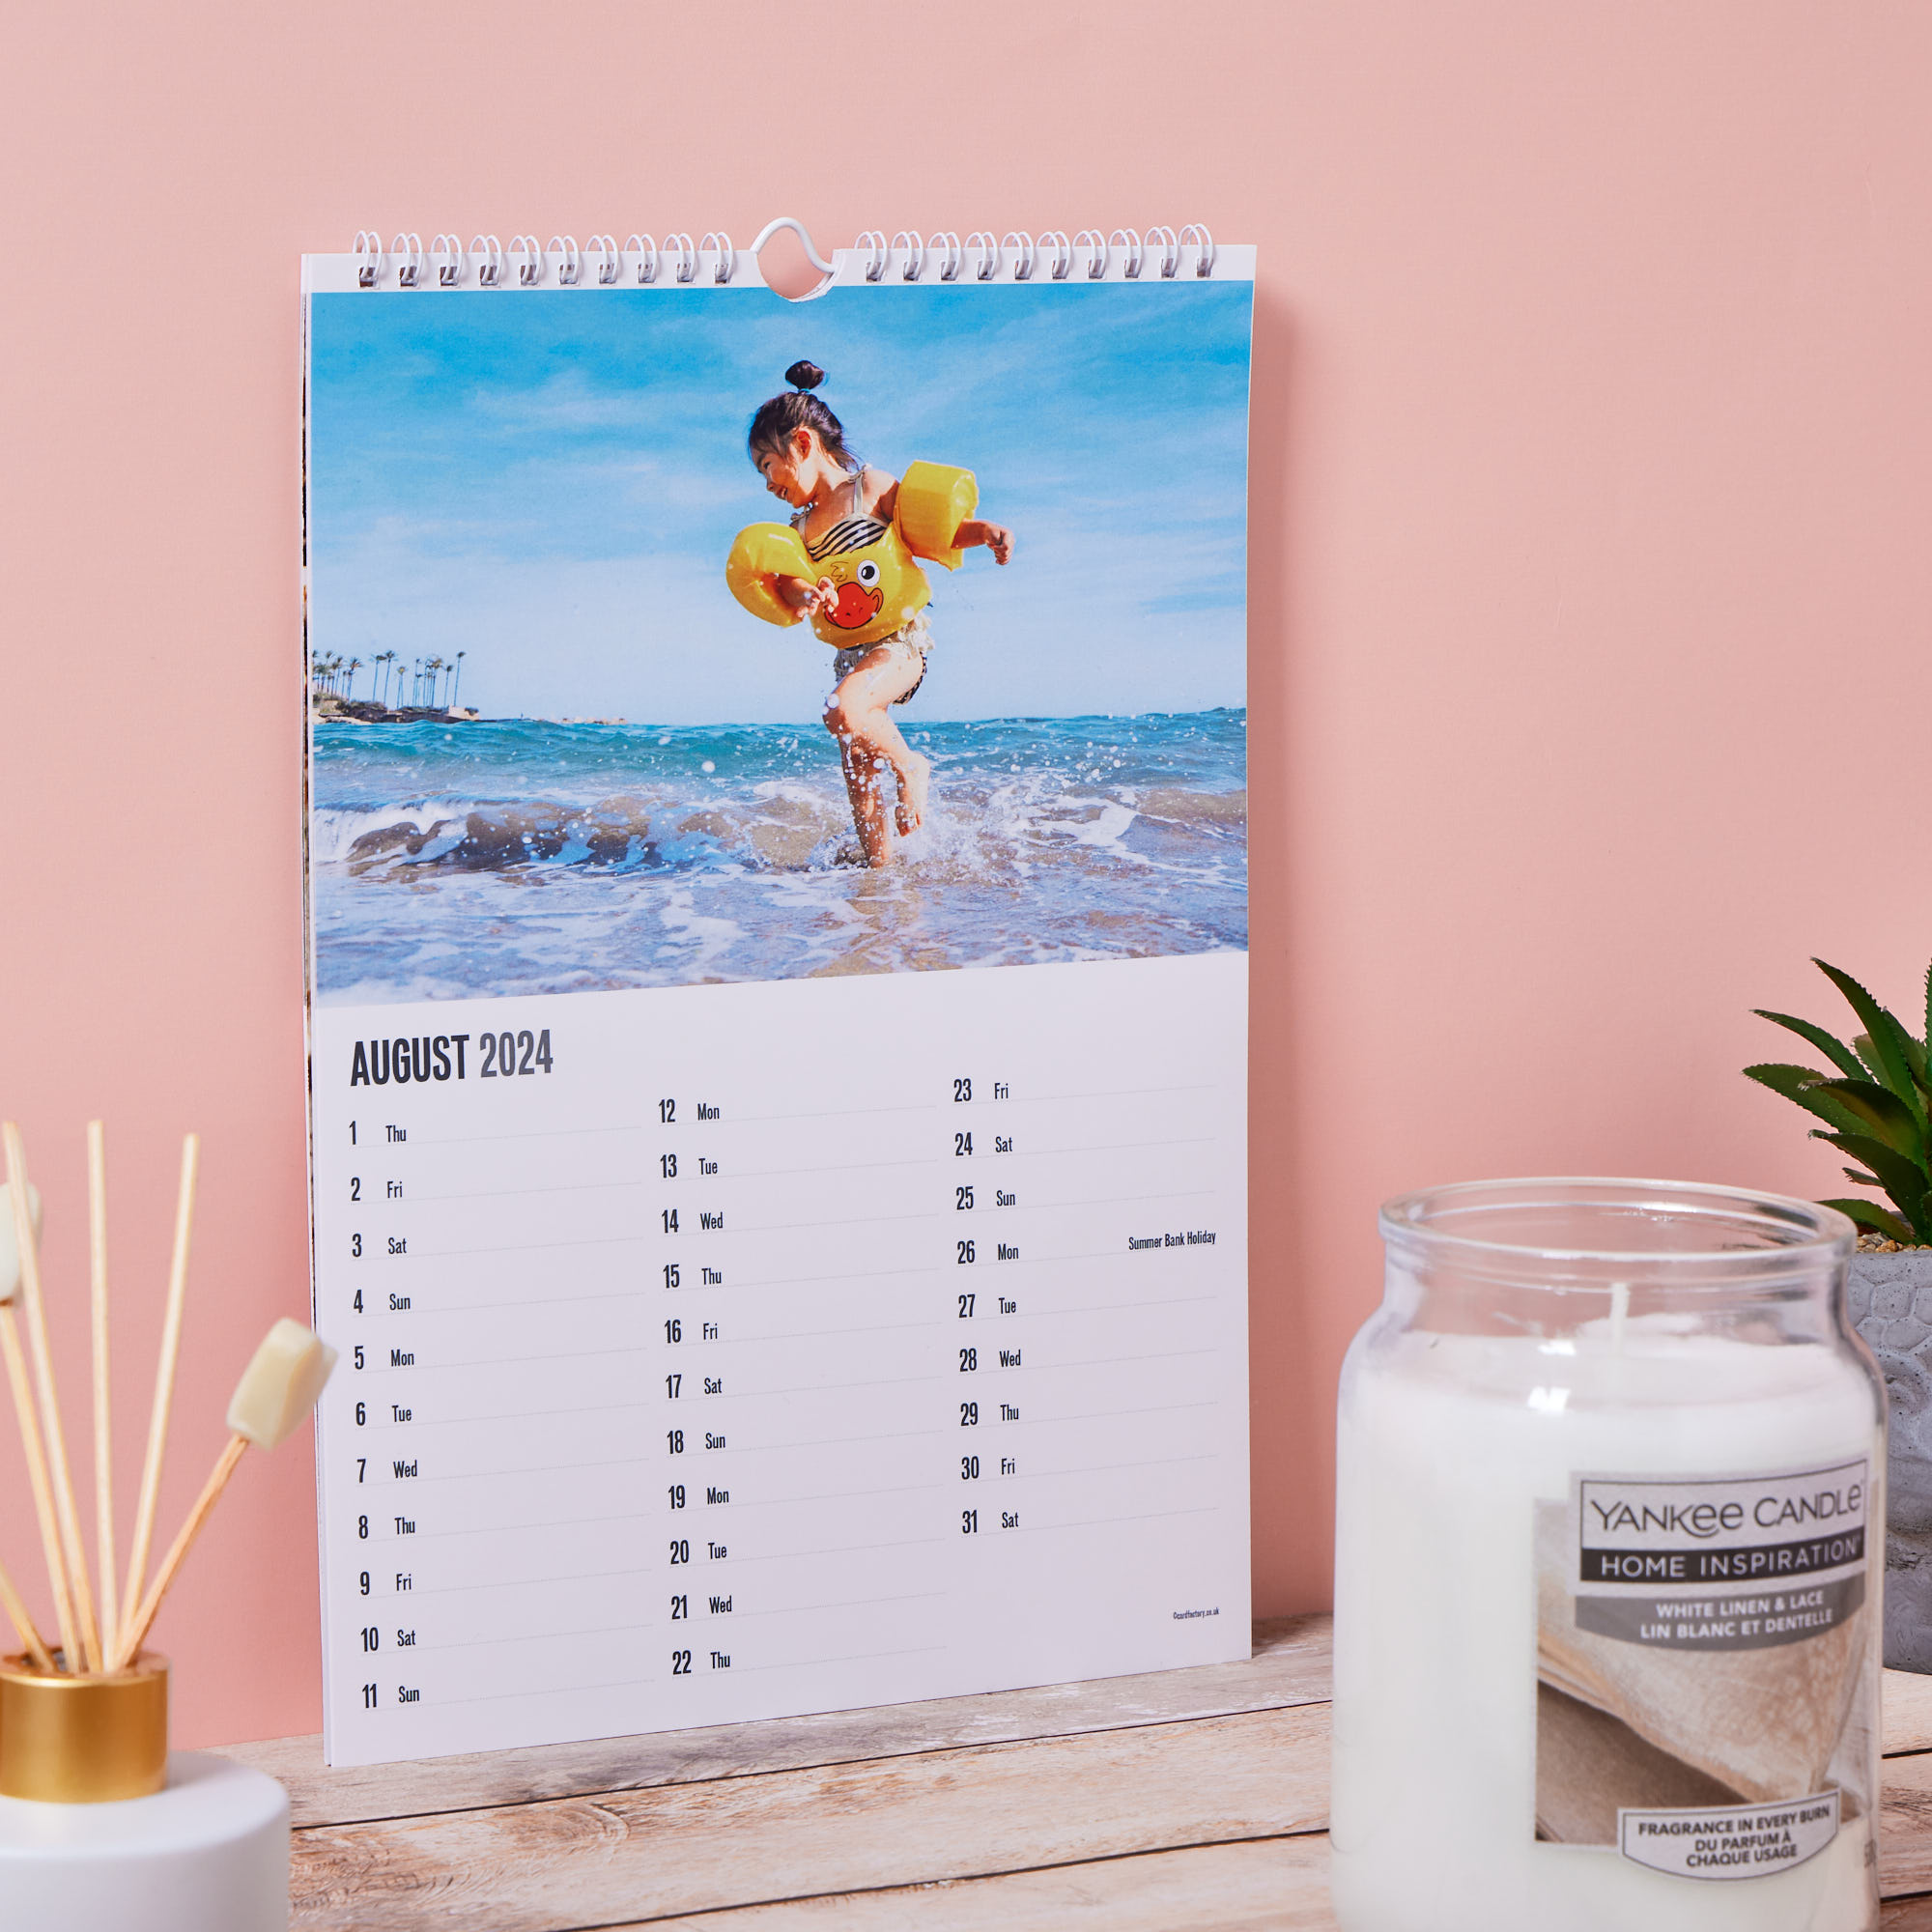 Create Your Own Photo Upload Calendar